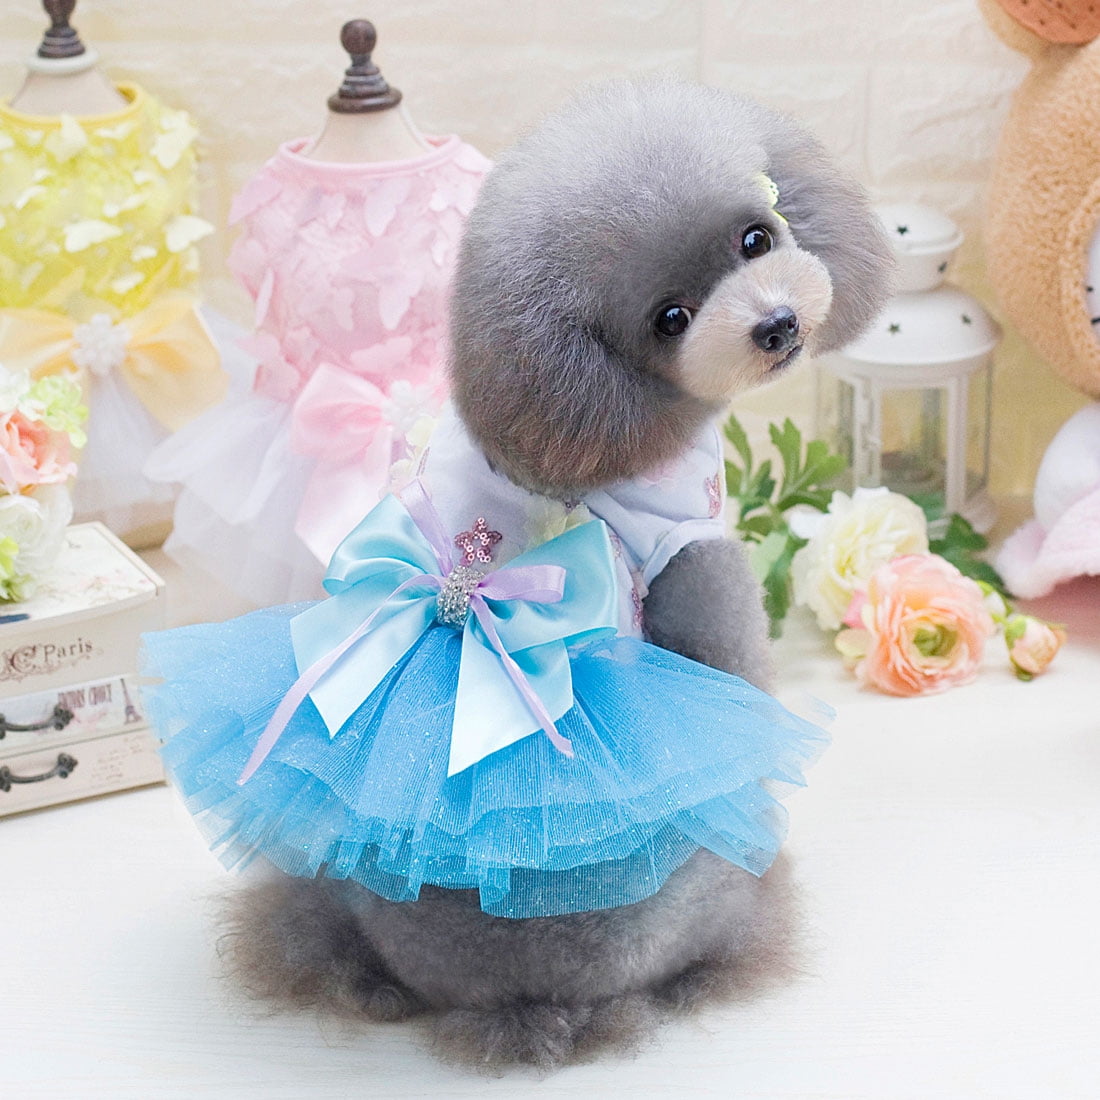 PLUS PO Puppy Dress Dog Dresses Dogs Clothes Bling Dog Dress Skirt For Small Dog Wedding Dresses For Dog Puppy Clothes Cat Clothes Summer Dog Clothes blue,xs